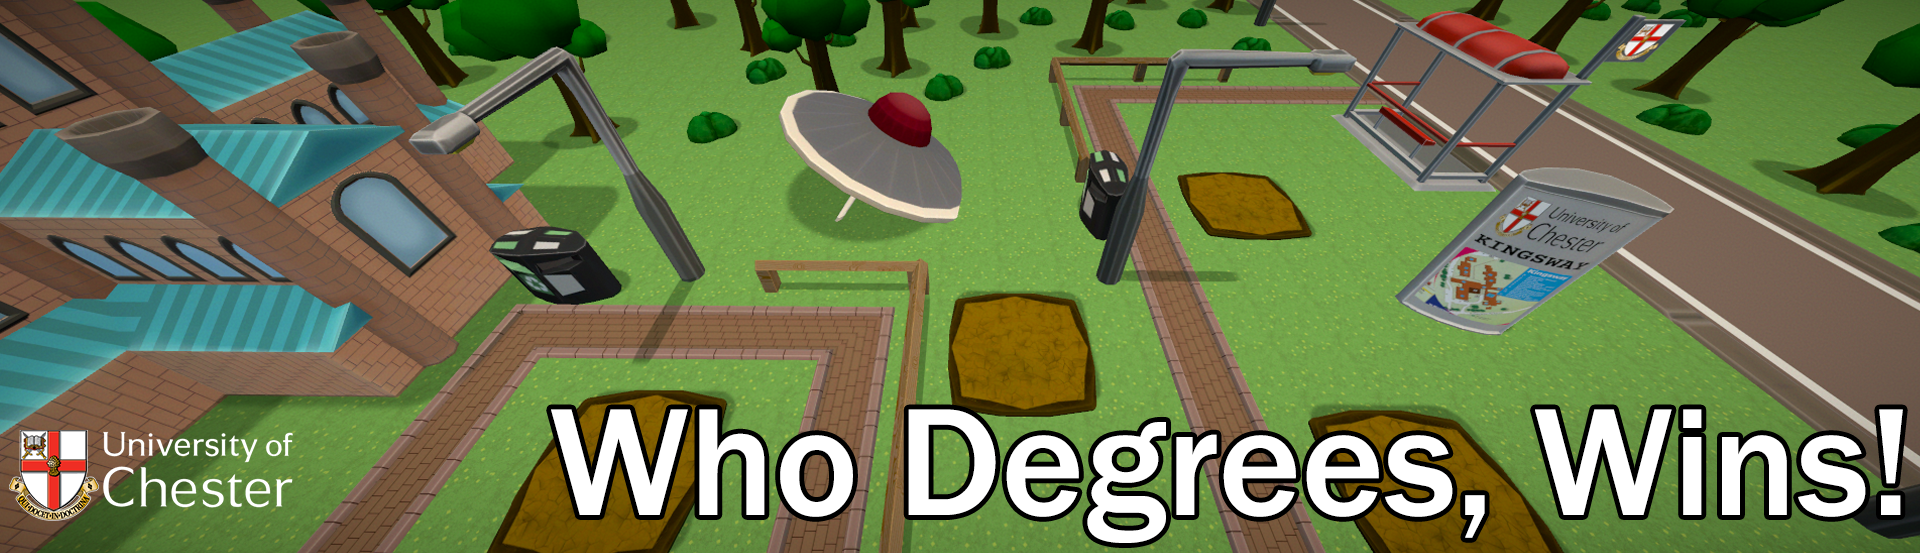 Who Degrees, Wins!